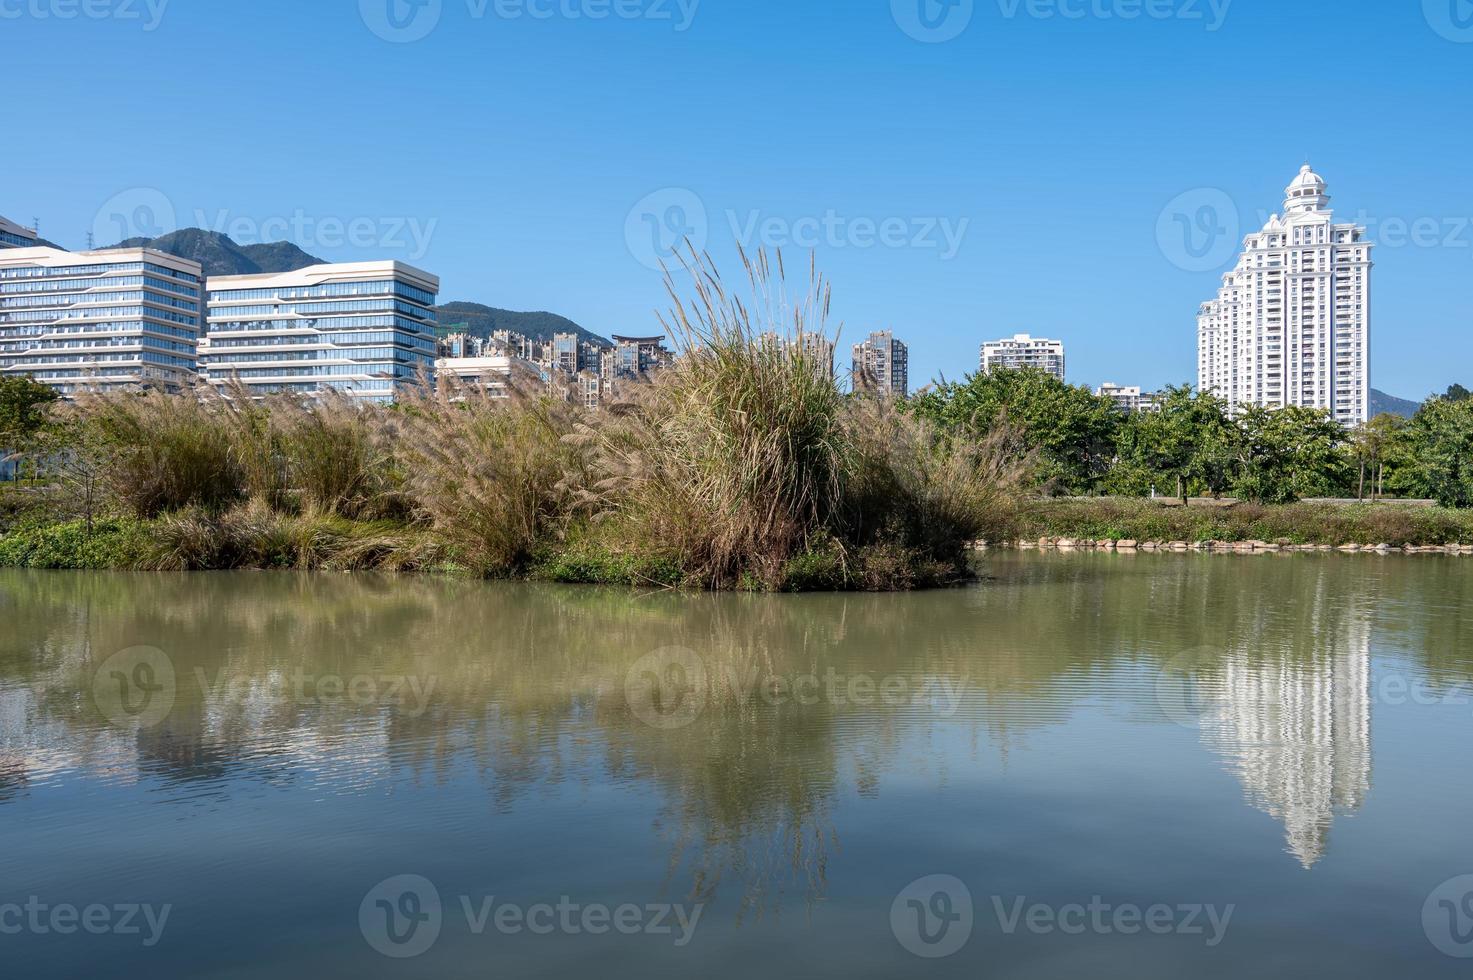 The river reflects the modern city buildings under the blue sky photo